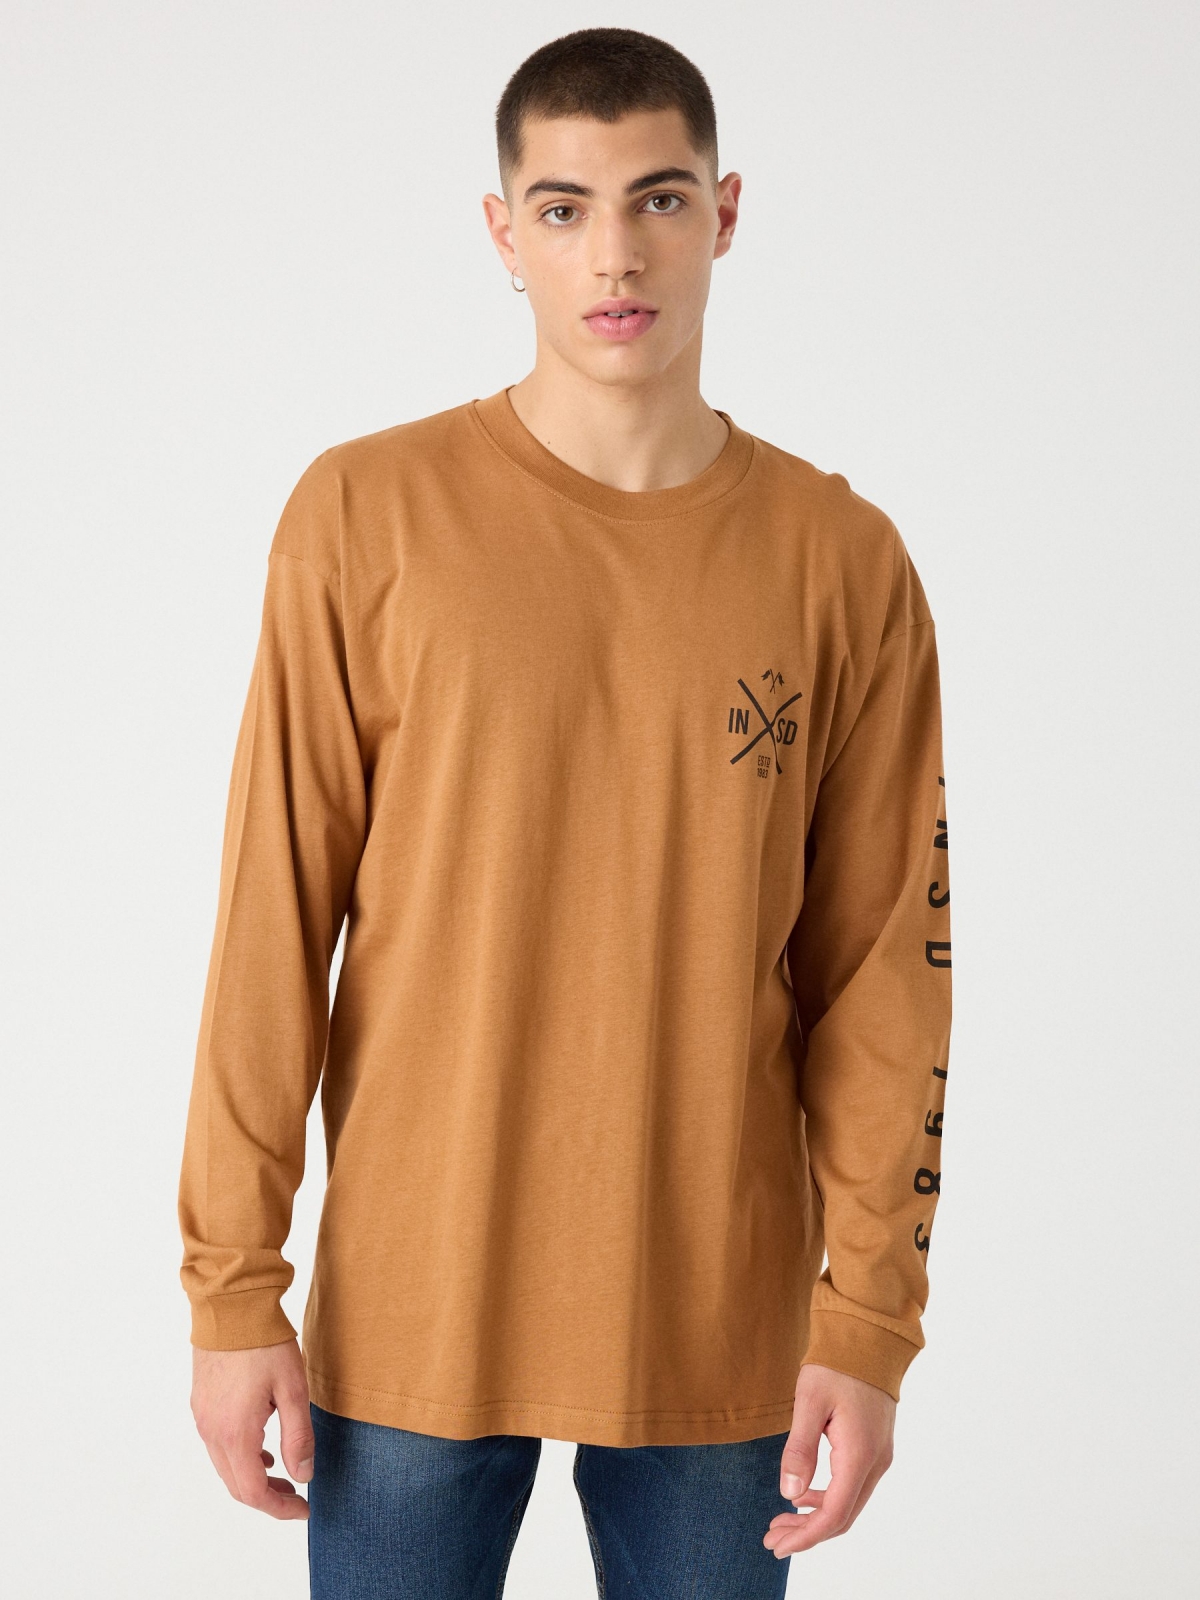 Printed t-shirt with cuffs cinnamon middle front view